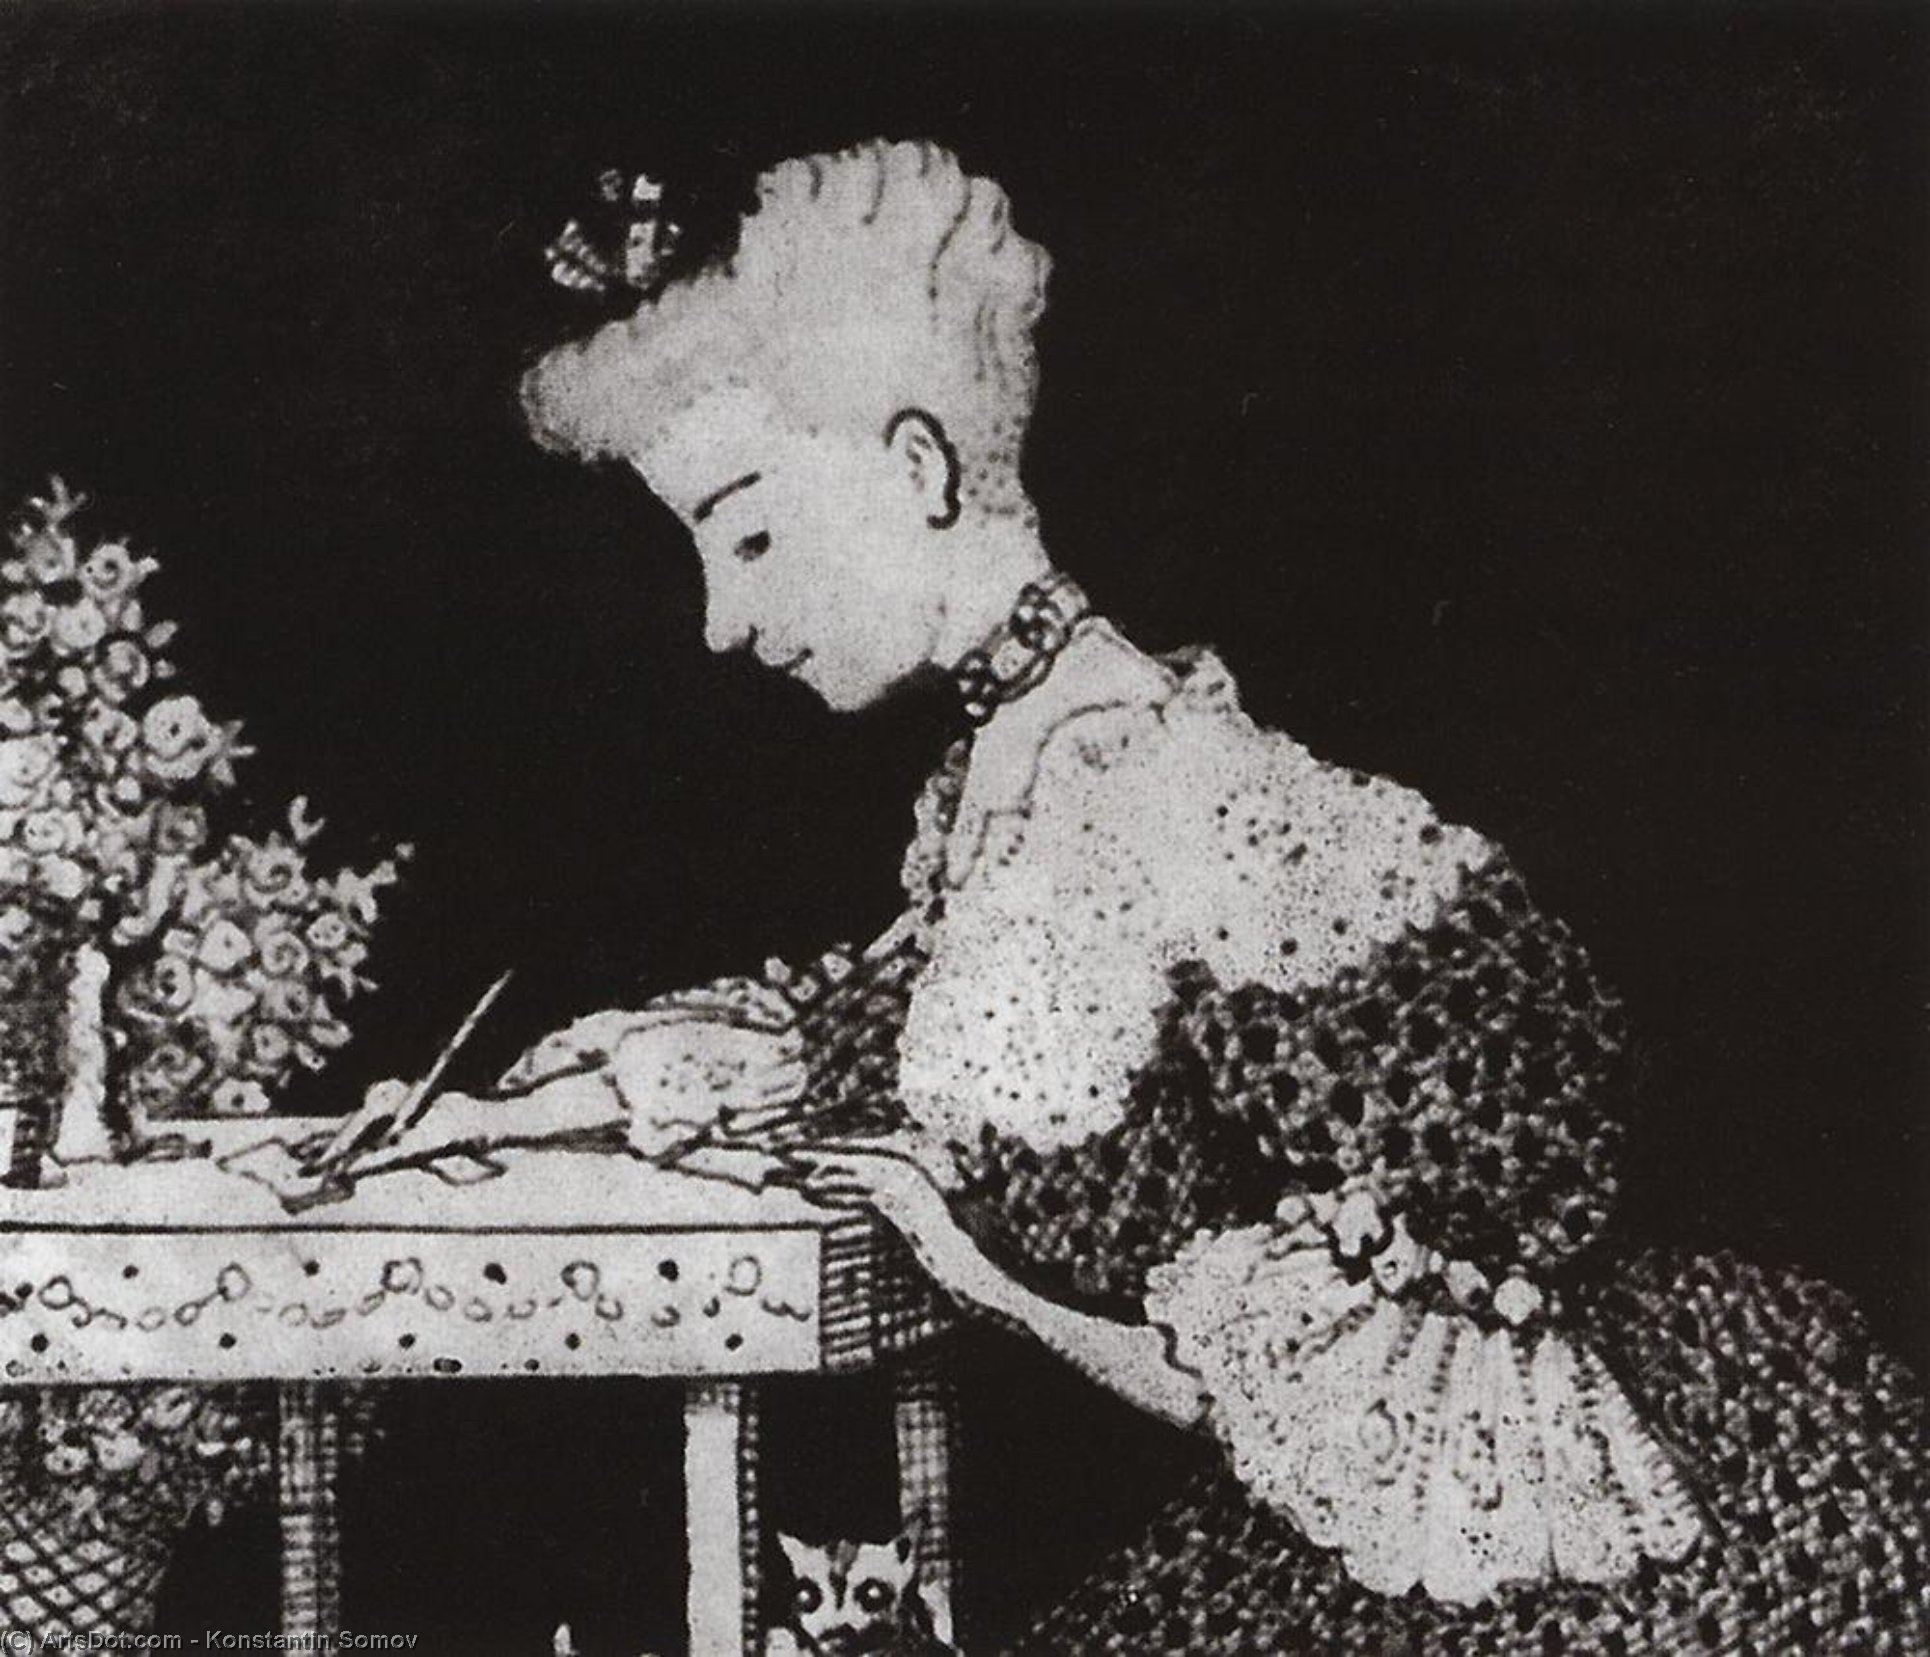 WikiOO.org - 백과 사전 - 회화, 삽화 Konstantin Somov - The Lady behind the Desk (Anonymous Letter)